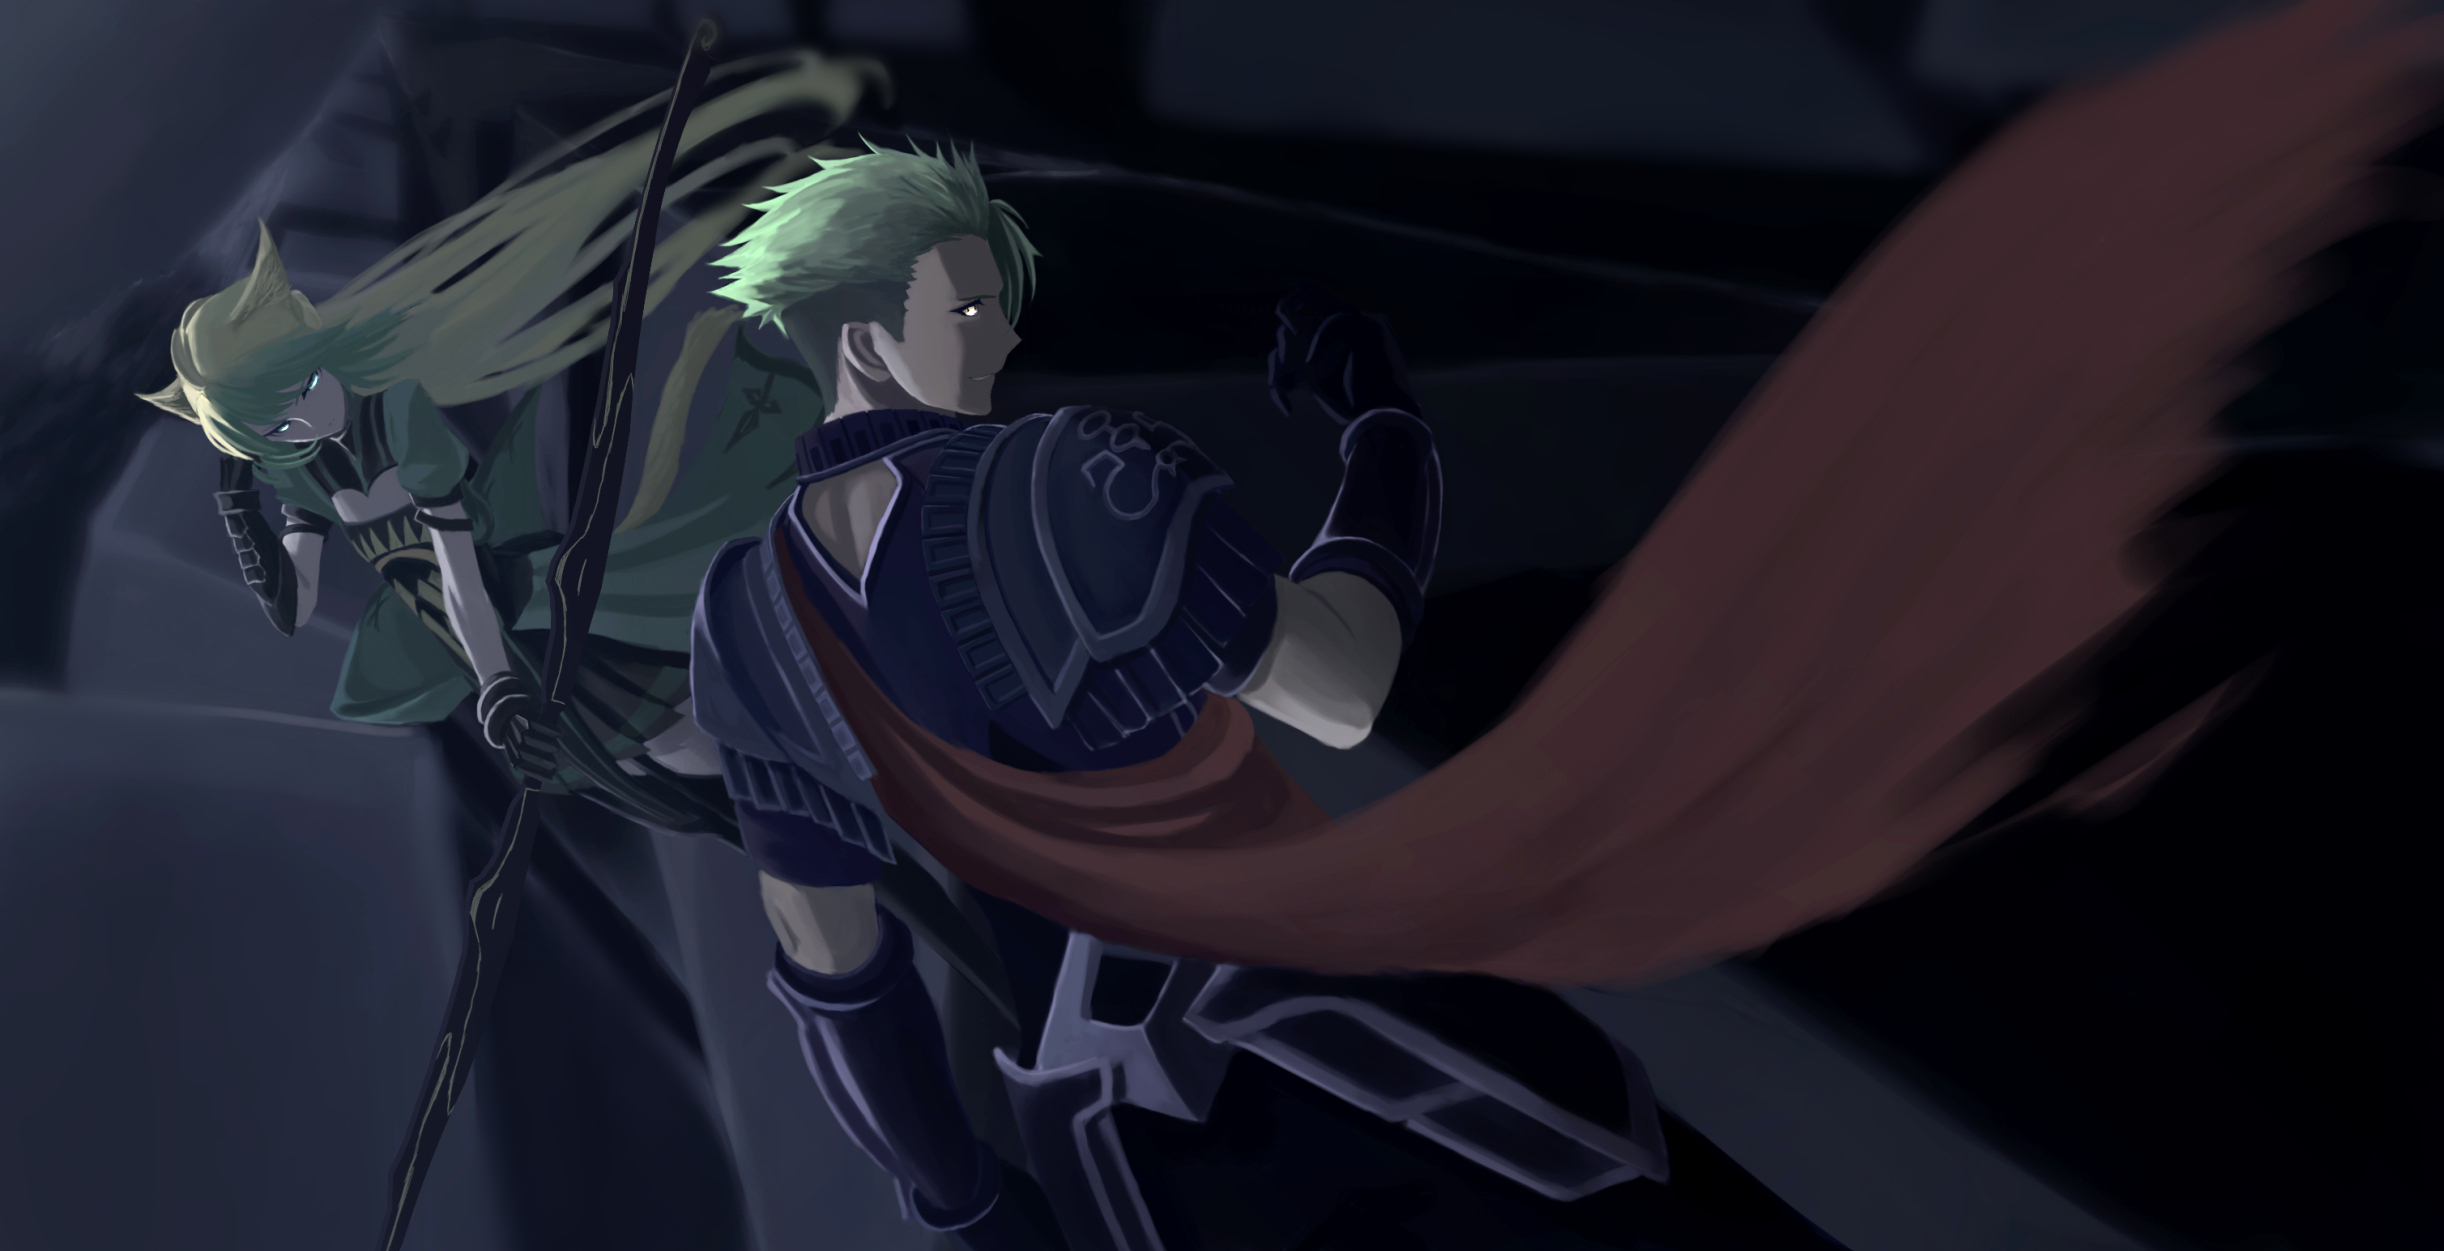 Achilles Fate Apocrypha Archer Of Red Fate Apocrypha Atalanta Fate Apocrypha Rider Of Red Fate Apocr 2444x1251